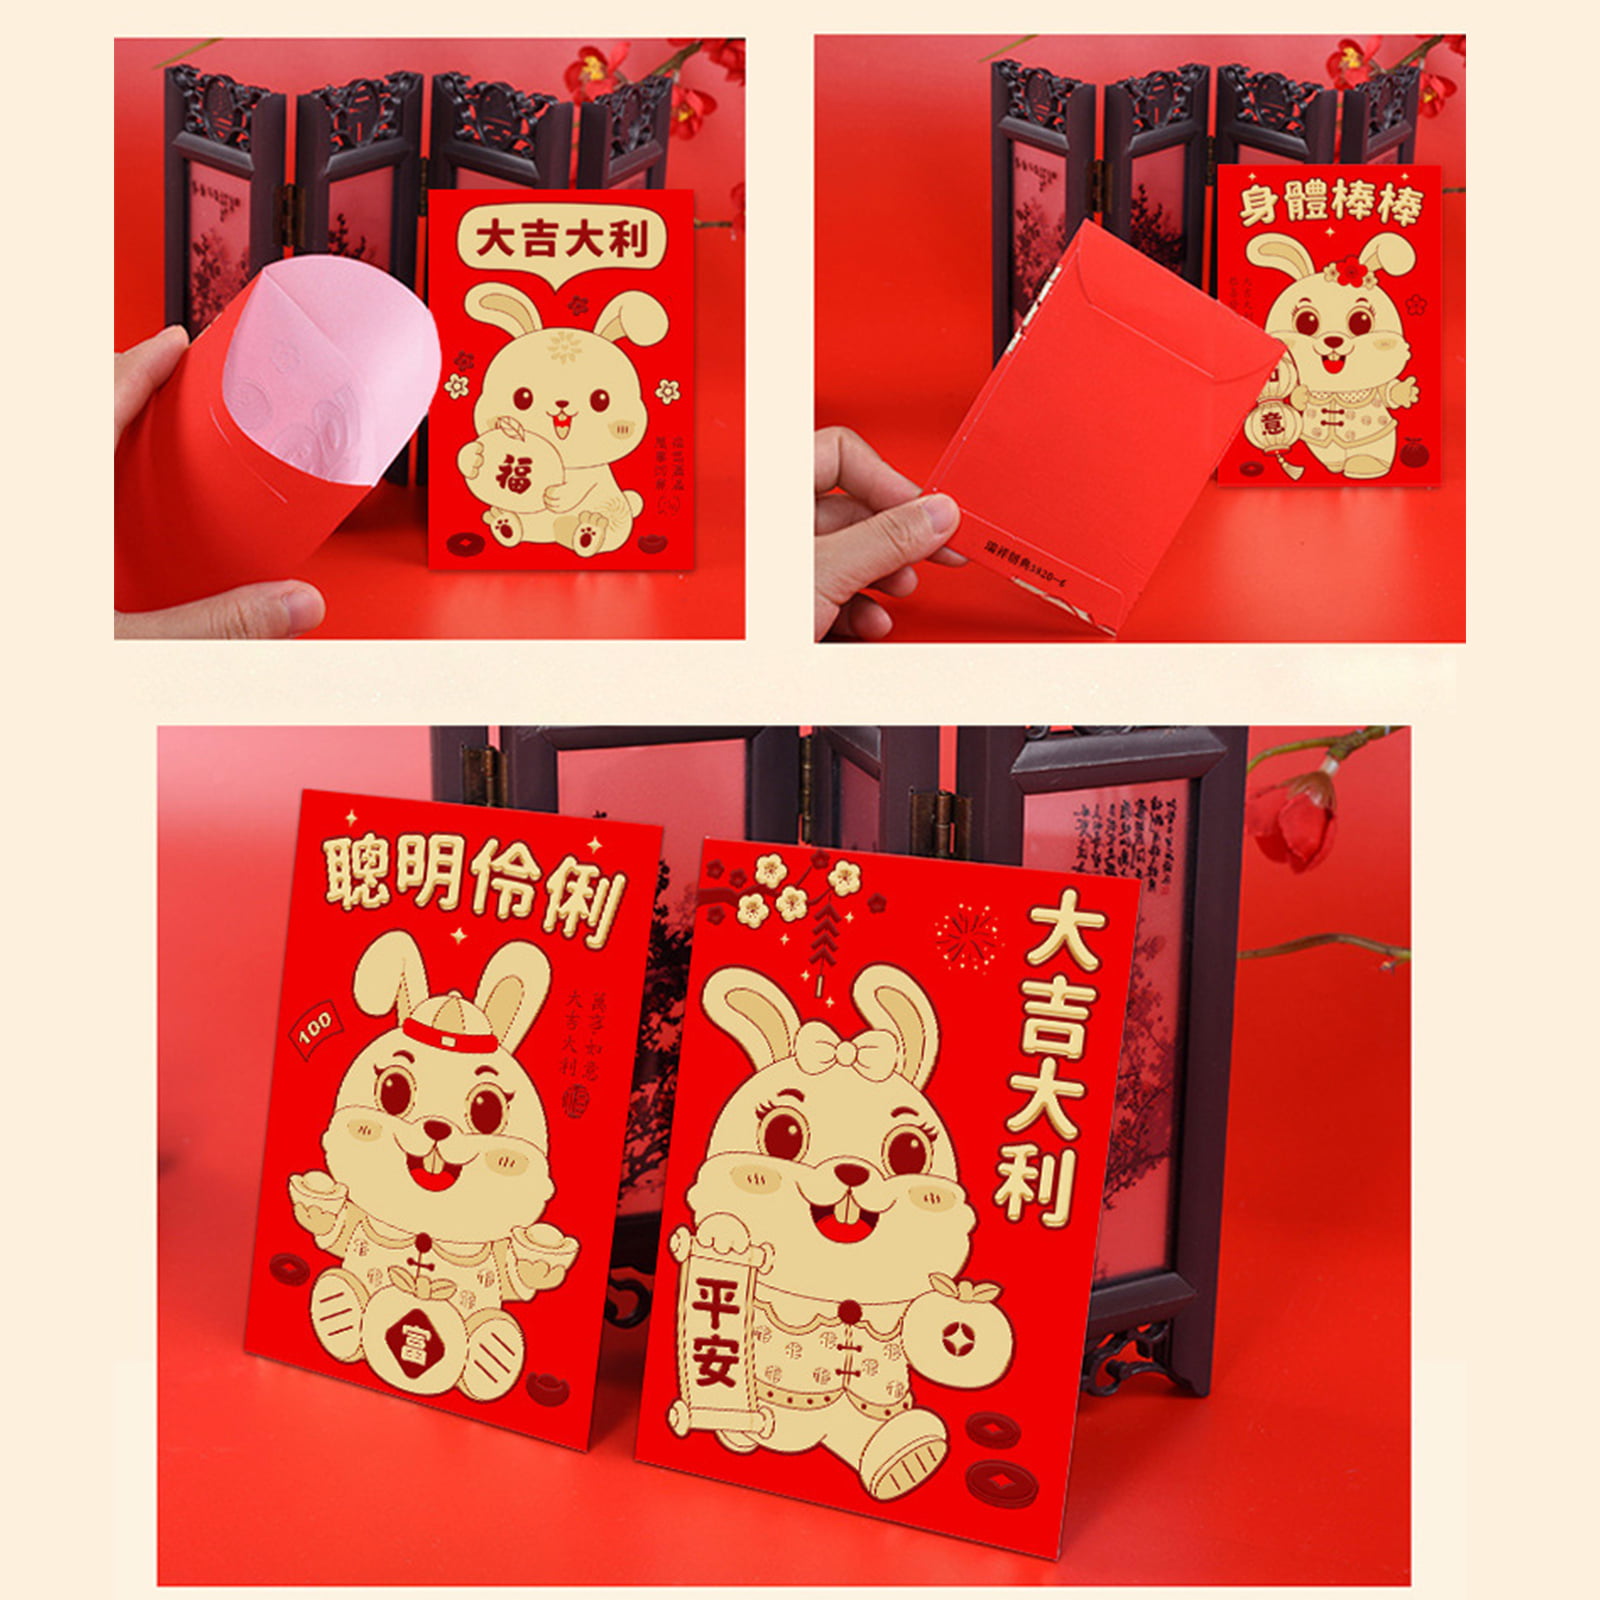  Red Envelopes Chinese 2023 12pcs,Chinese Red Envelopes New Year  Rabbit Red Packet,Lucky Money Envelopes with Rabbit Patterns Emboss Foil  Chinese New Year Lunar Rabbit Hong Bao for Spring Festival C 